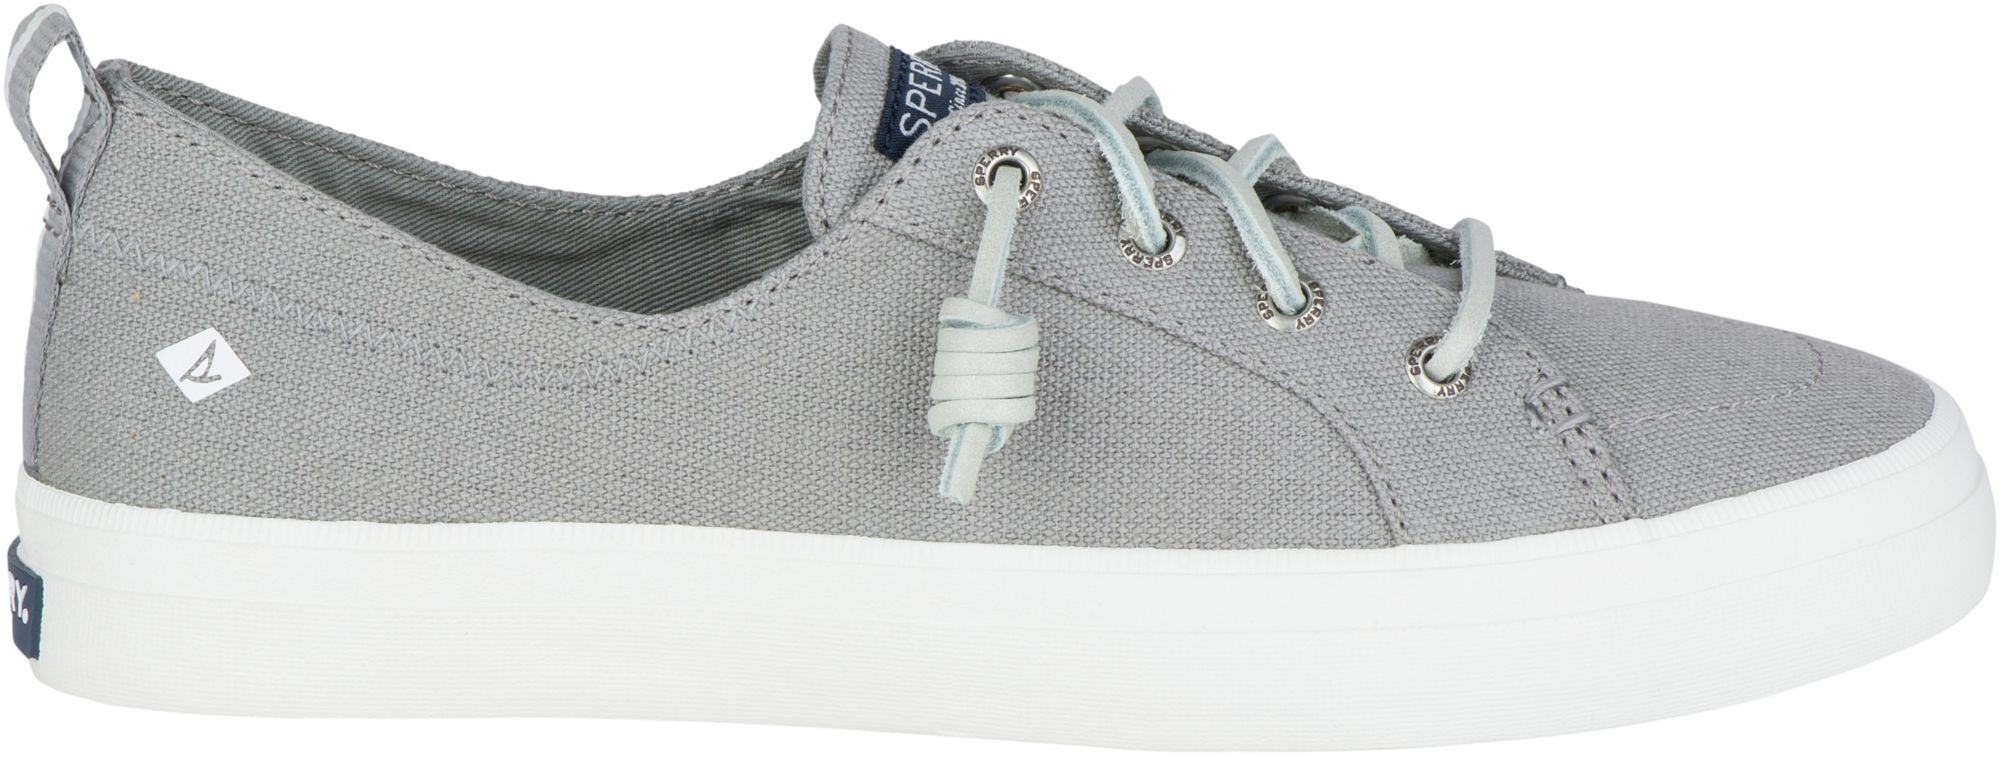 womens gray casual shoes